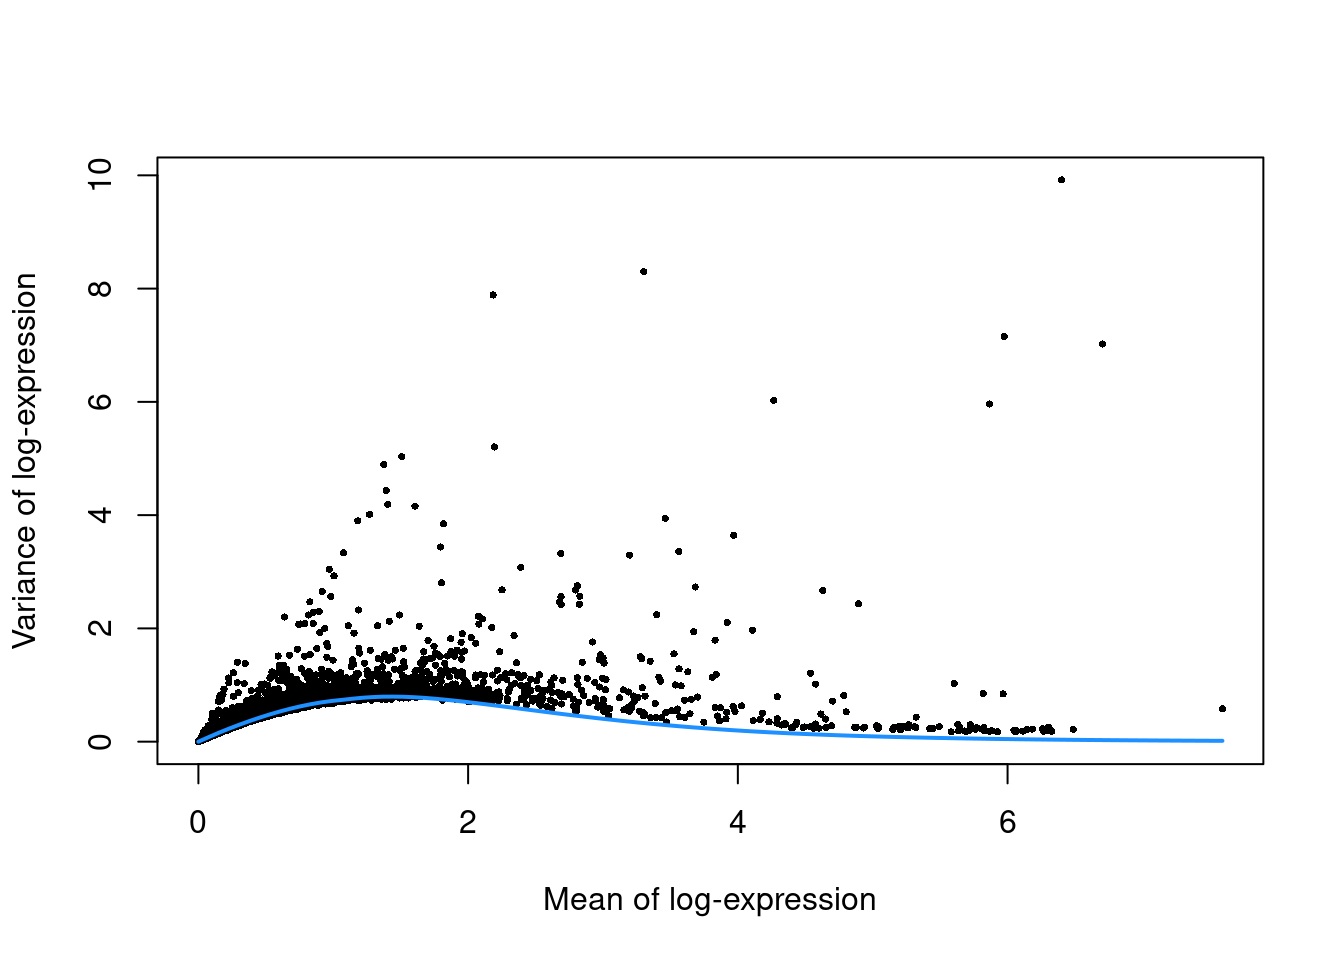 Per-gene variance as a function of the mean for the log-expression values in the Bach mammary gland dataset. Each point represents a gene (black) with the mean-variance trend (blue) fitted to simulated Poisson counts.